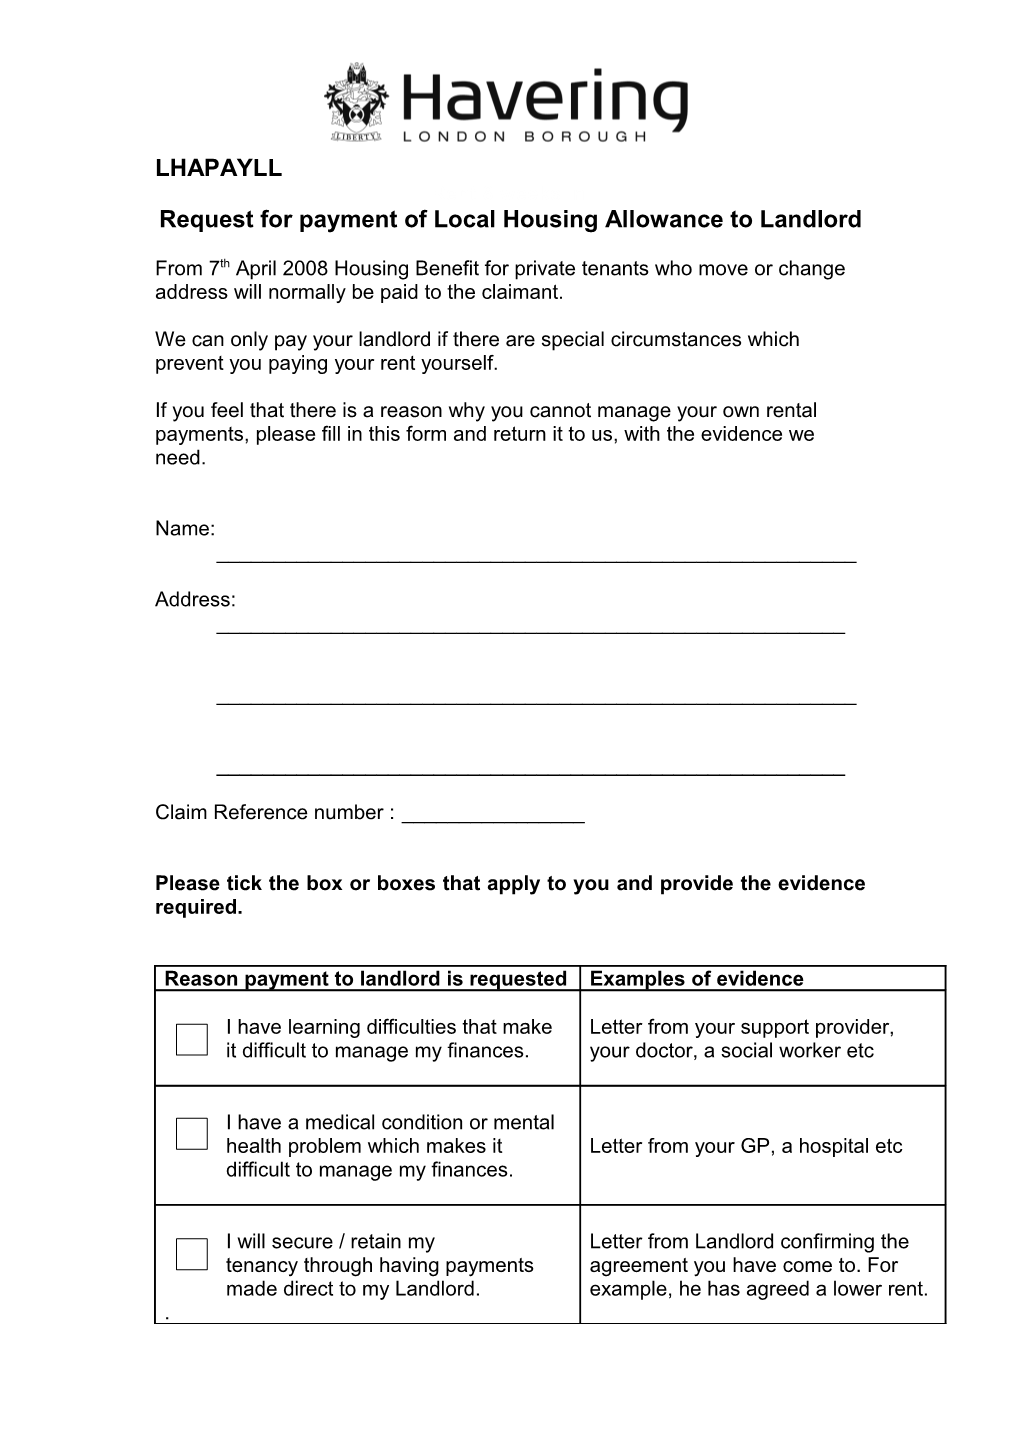 Form for Tenant to Request Local Housing Allowance to Landlord